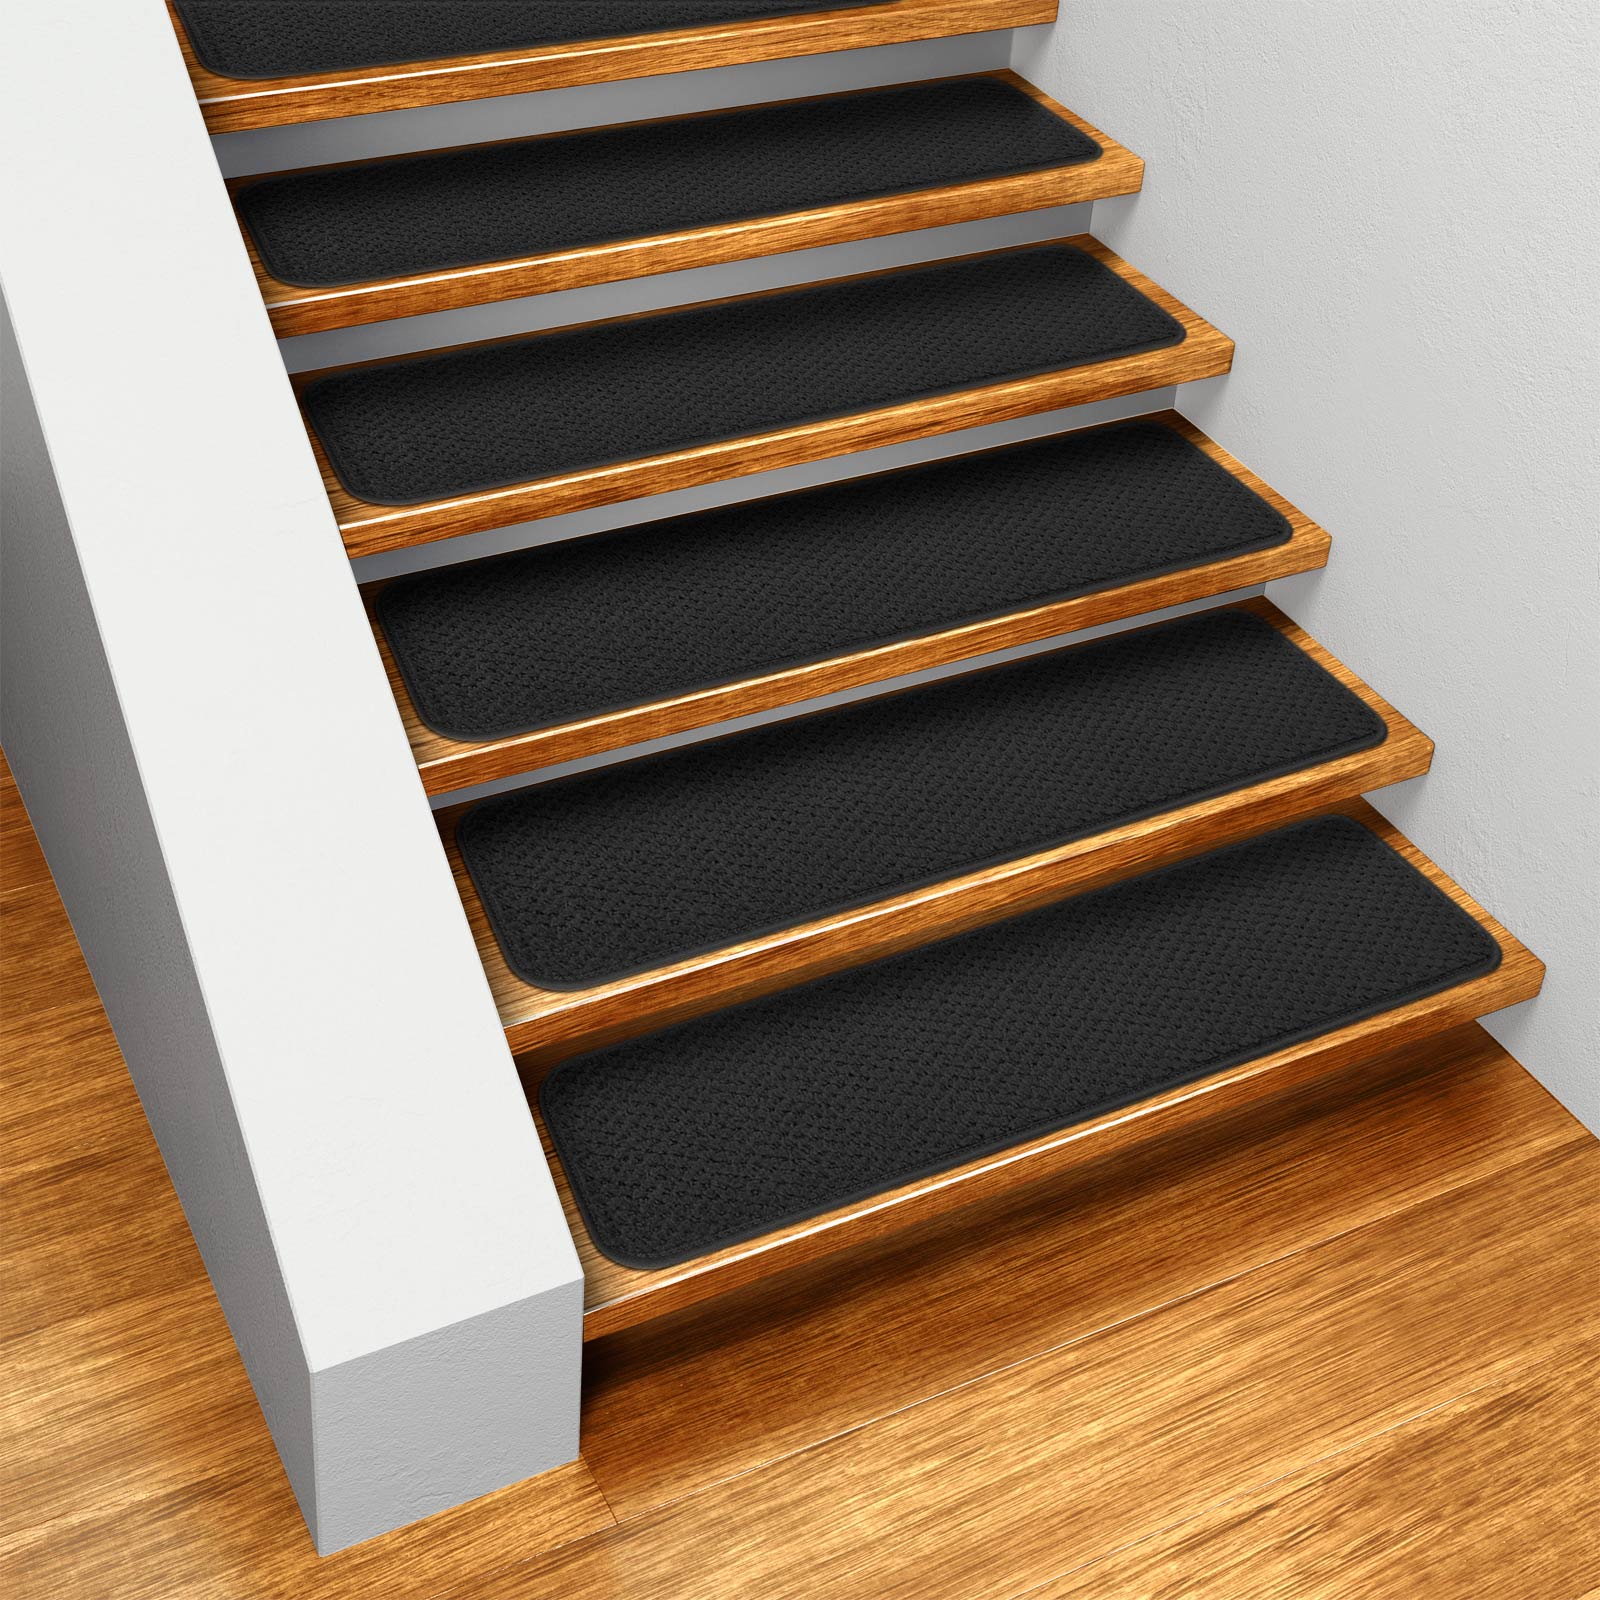 House, Home and More Set of 12 Skid-resistant Carpet Stair Treads - Black - 8 In. X 30 In.